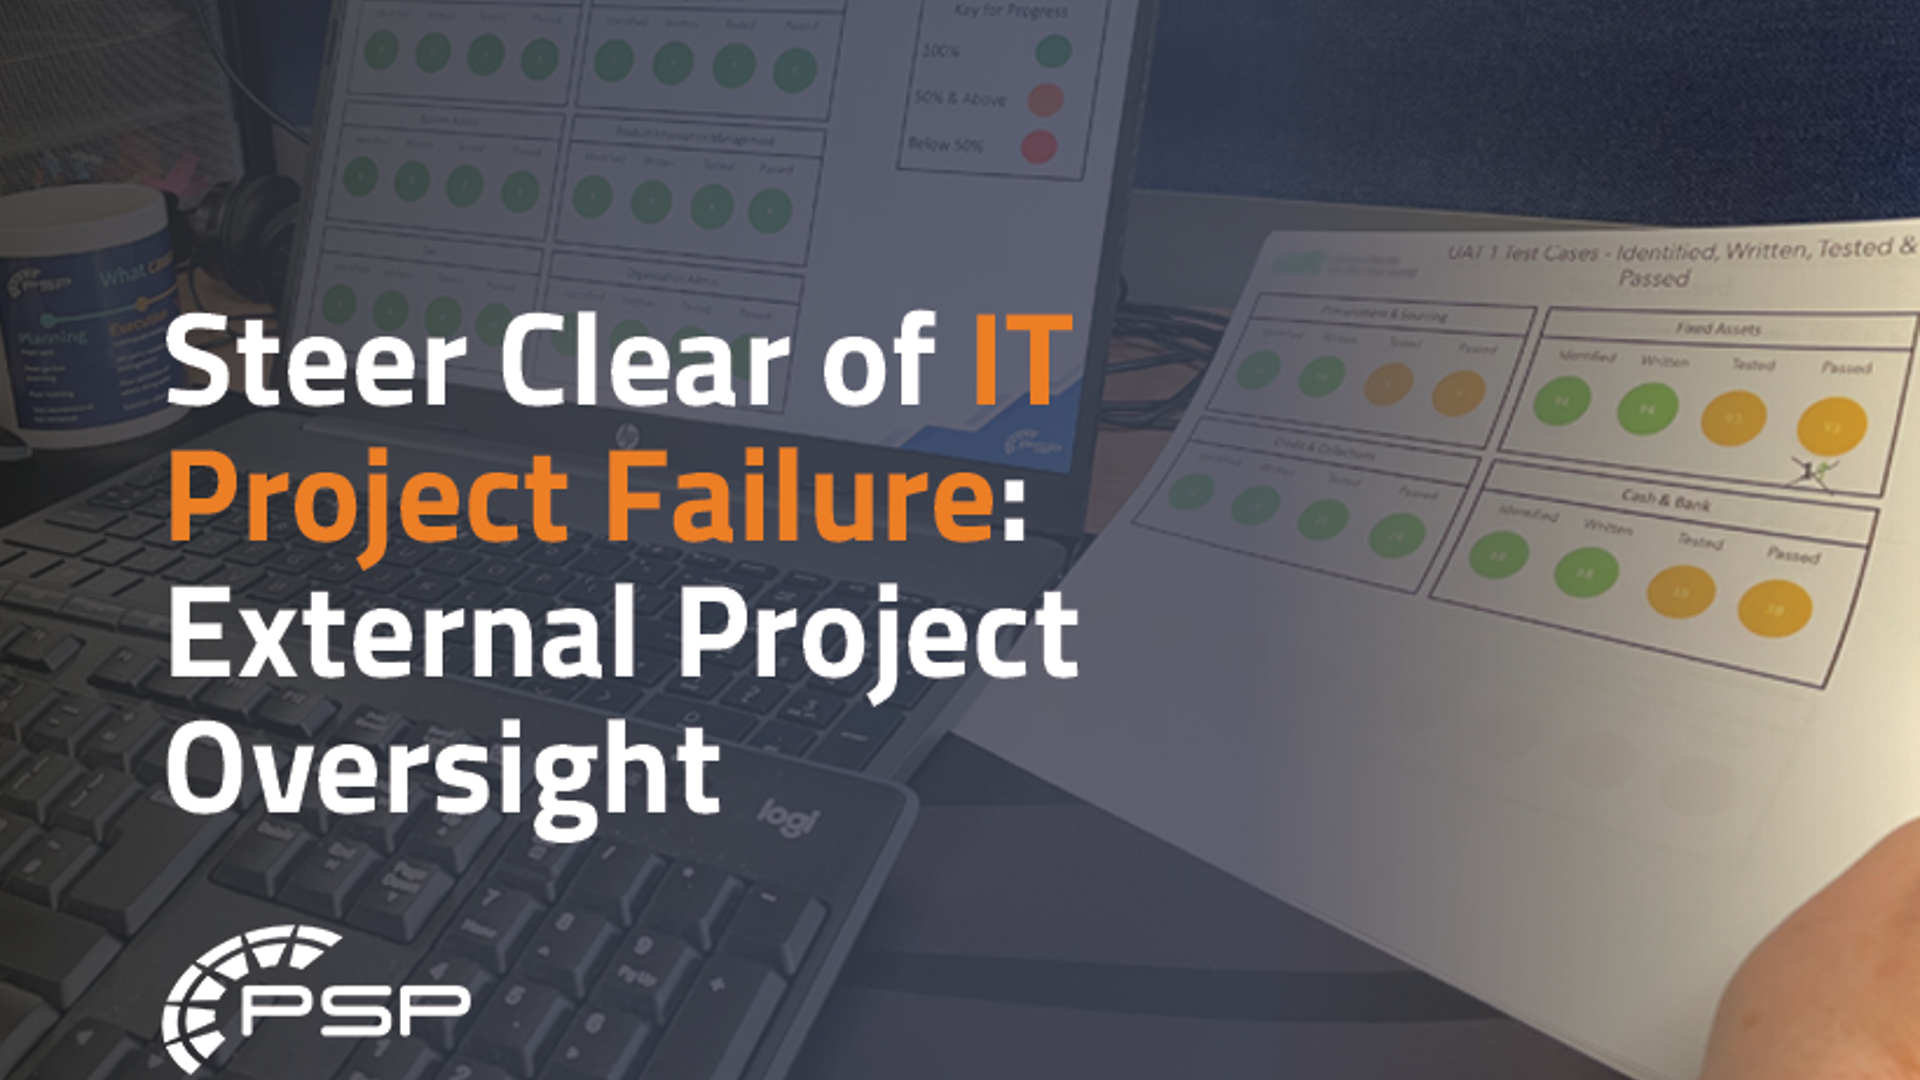 Steer clear of IT project failure: External project oversight